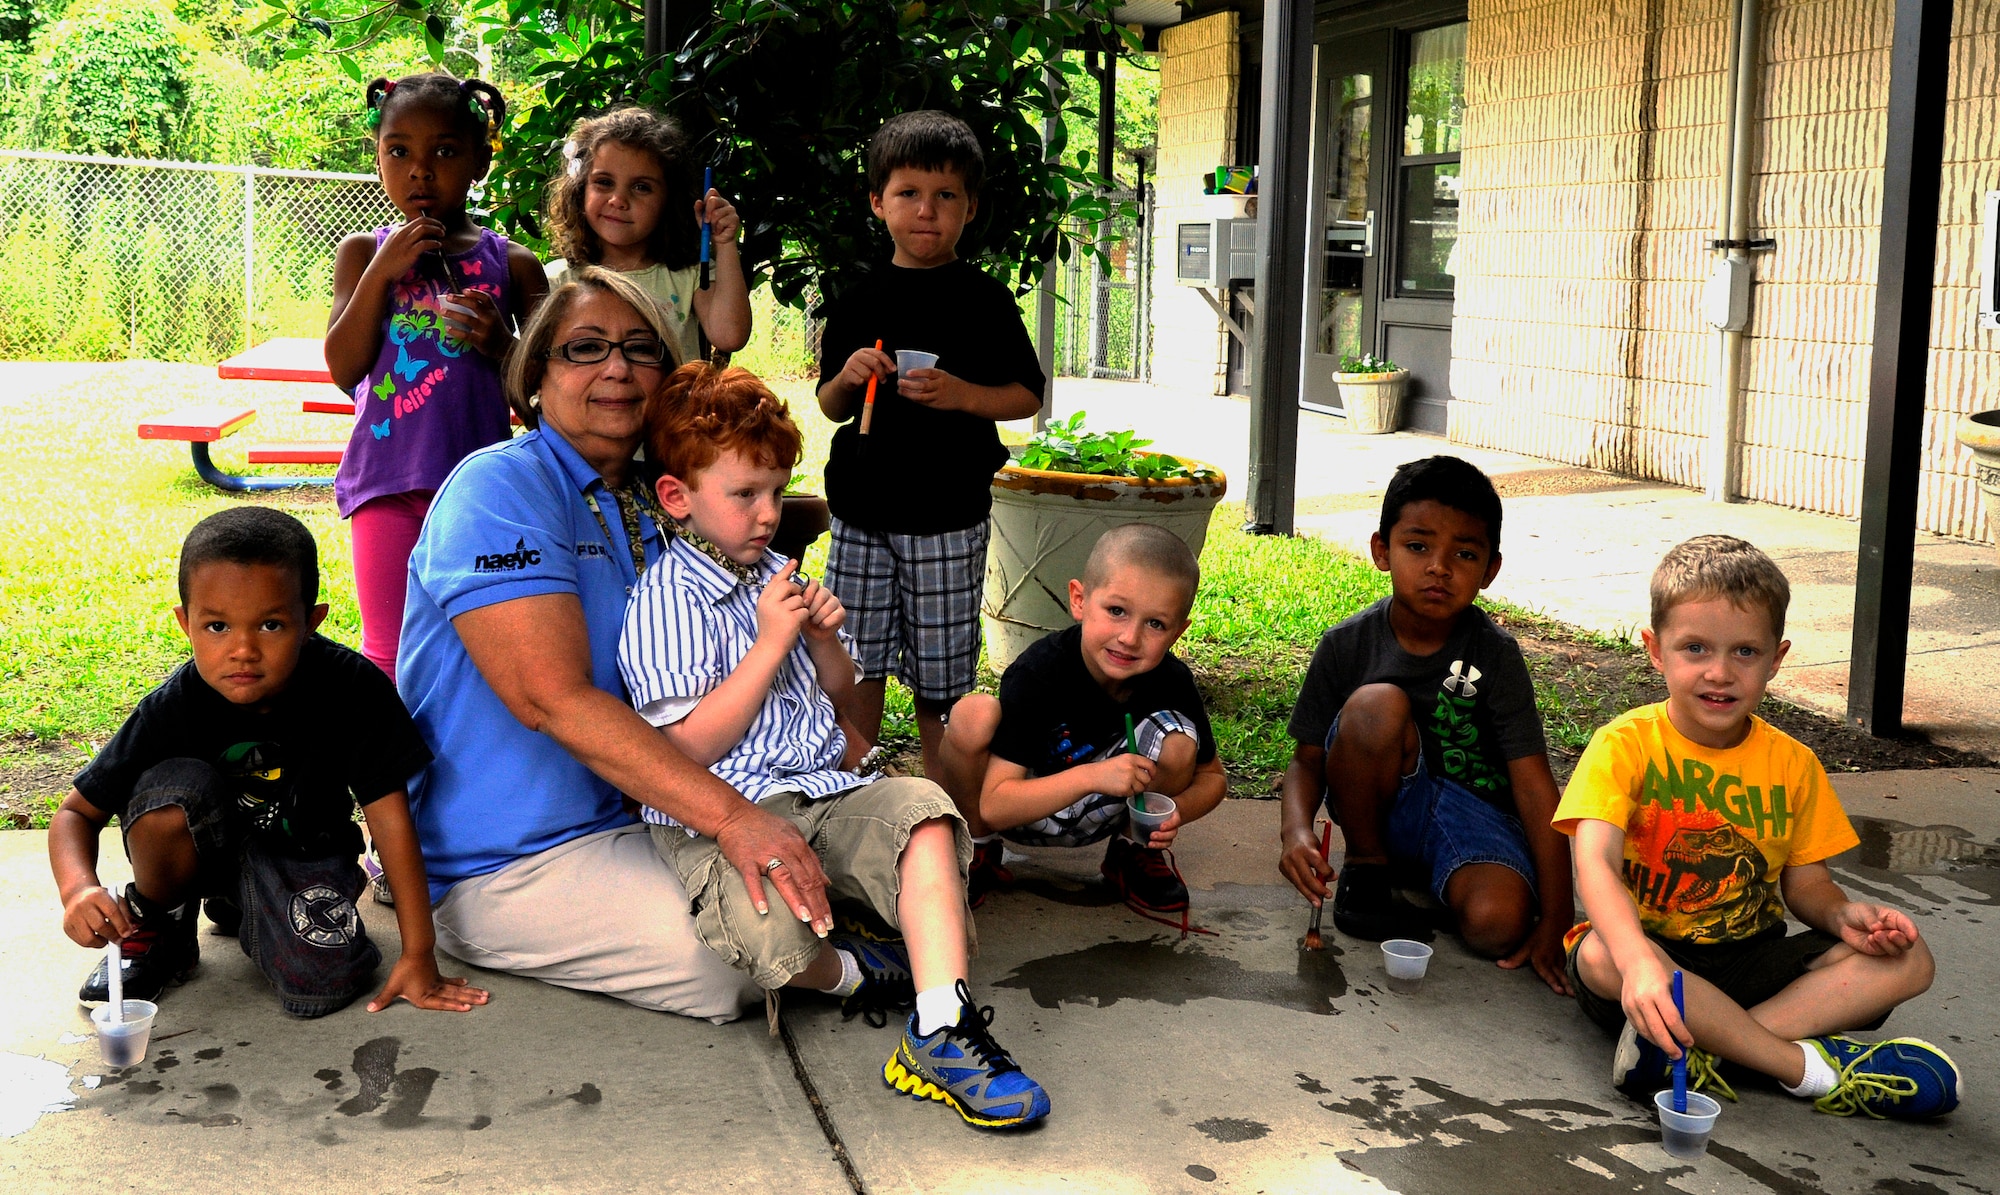 Nora Torres, preschool teacher, sits with her class during an outside activity at the main child development center on Hurlburt Field, Fla., June 25, 2014. Torres has worked at the CDC since 1985. (U.S. Air Force photo/Staff Sgt. Sarah Hanson)